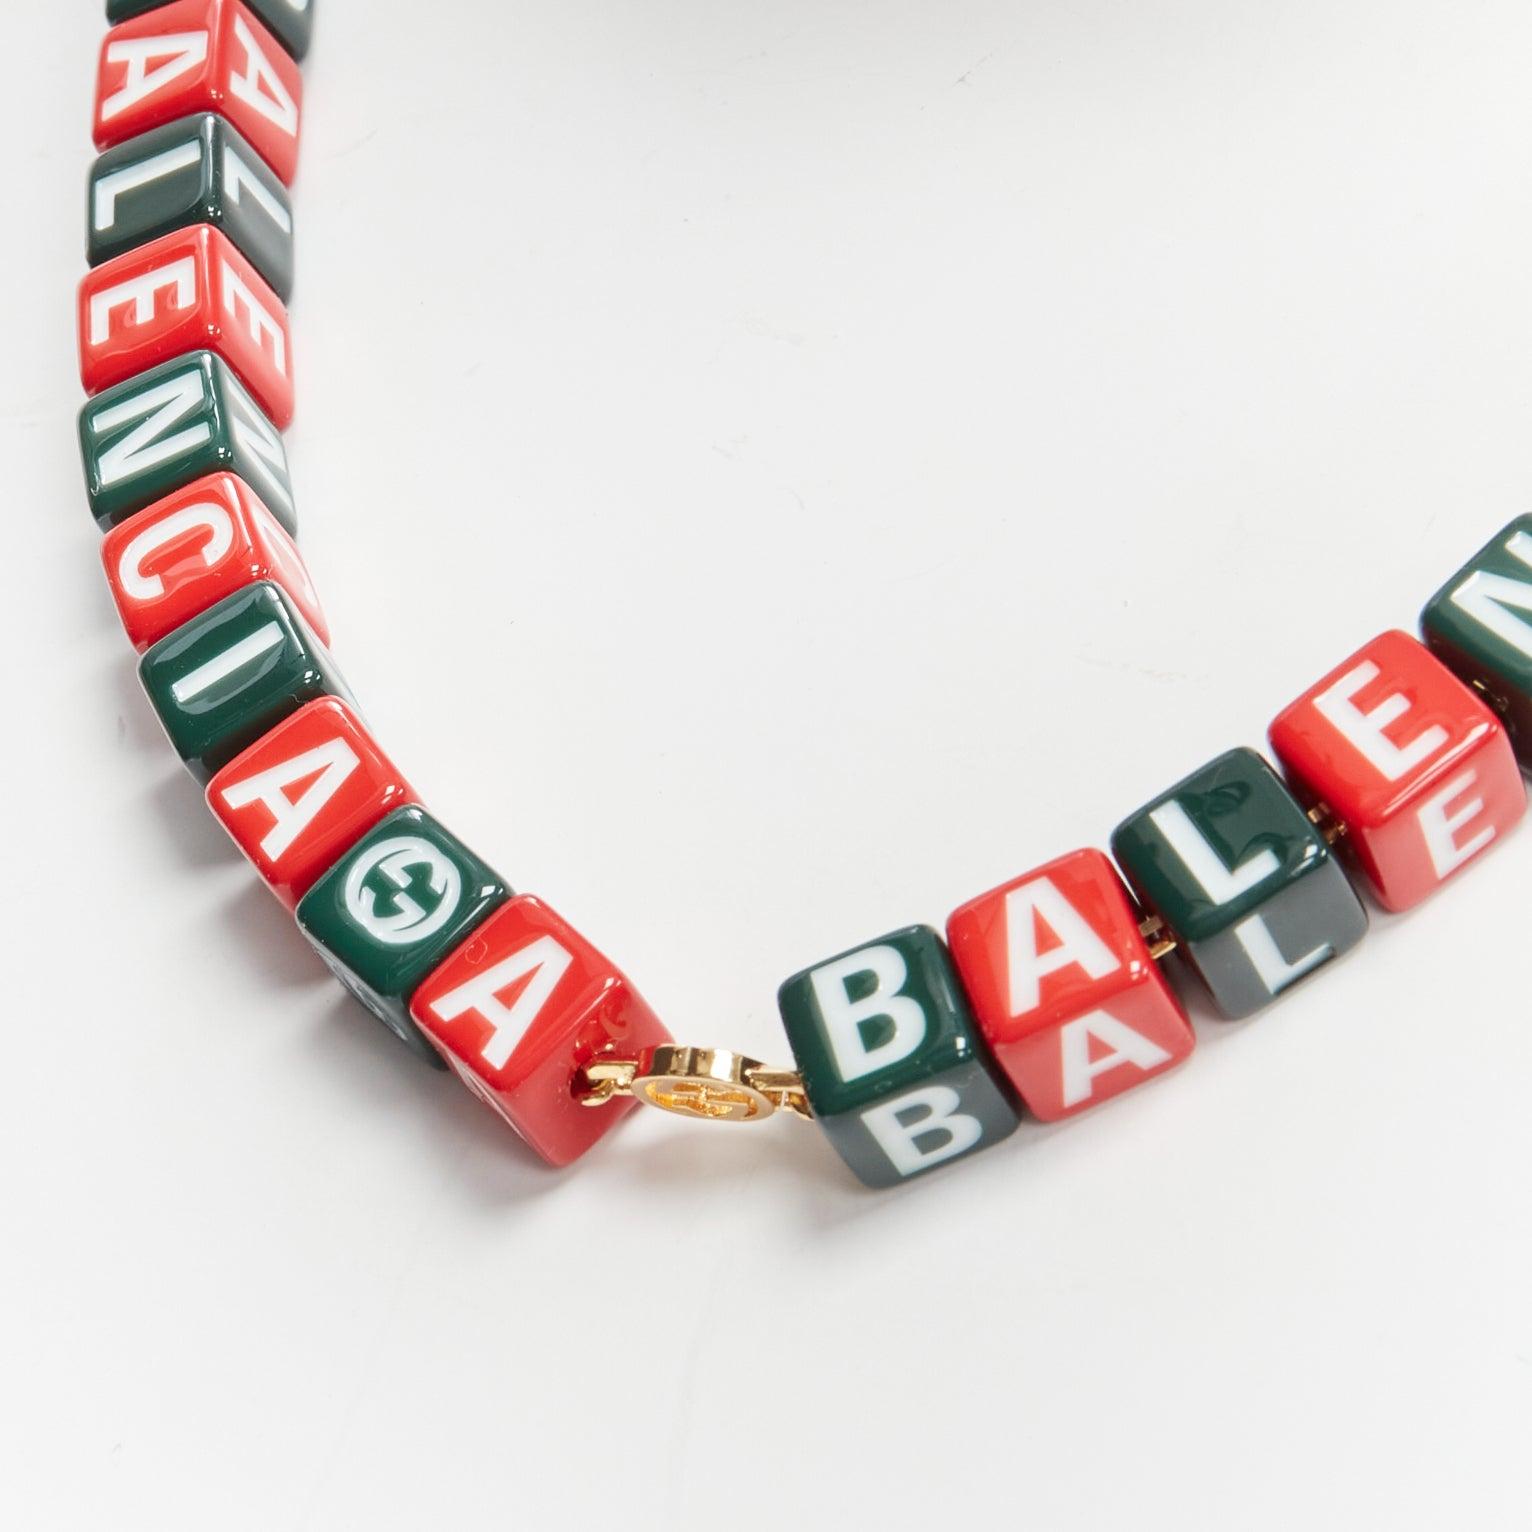 new GUCCI BALENCIAGA 2021 Hacker Project Symbols red green cubes short necklace
Reference: TGAS/D00599
Brand: Gucci
Designer: Alessandro Michele
Model: 677088i12r2 Symbols
Collection: BALENCIAGA 2021 Hacker Project - Runway
Material: Plastic,